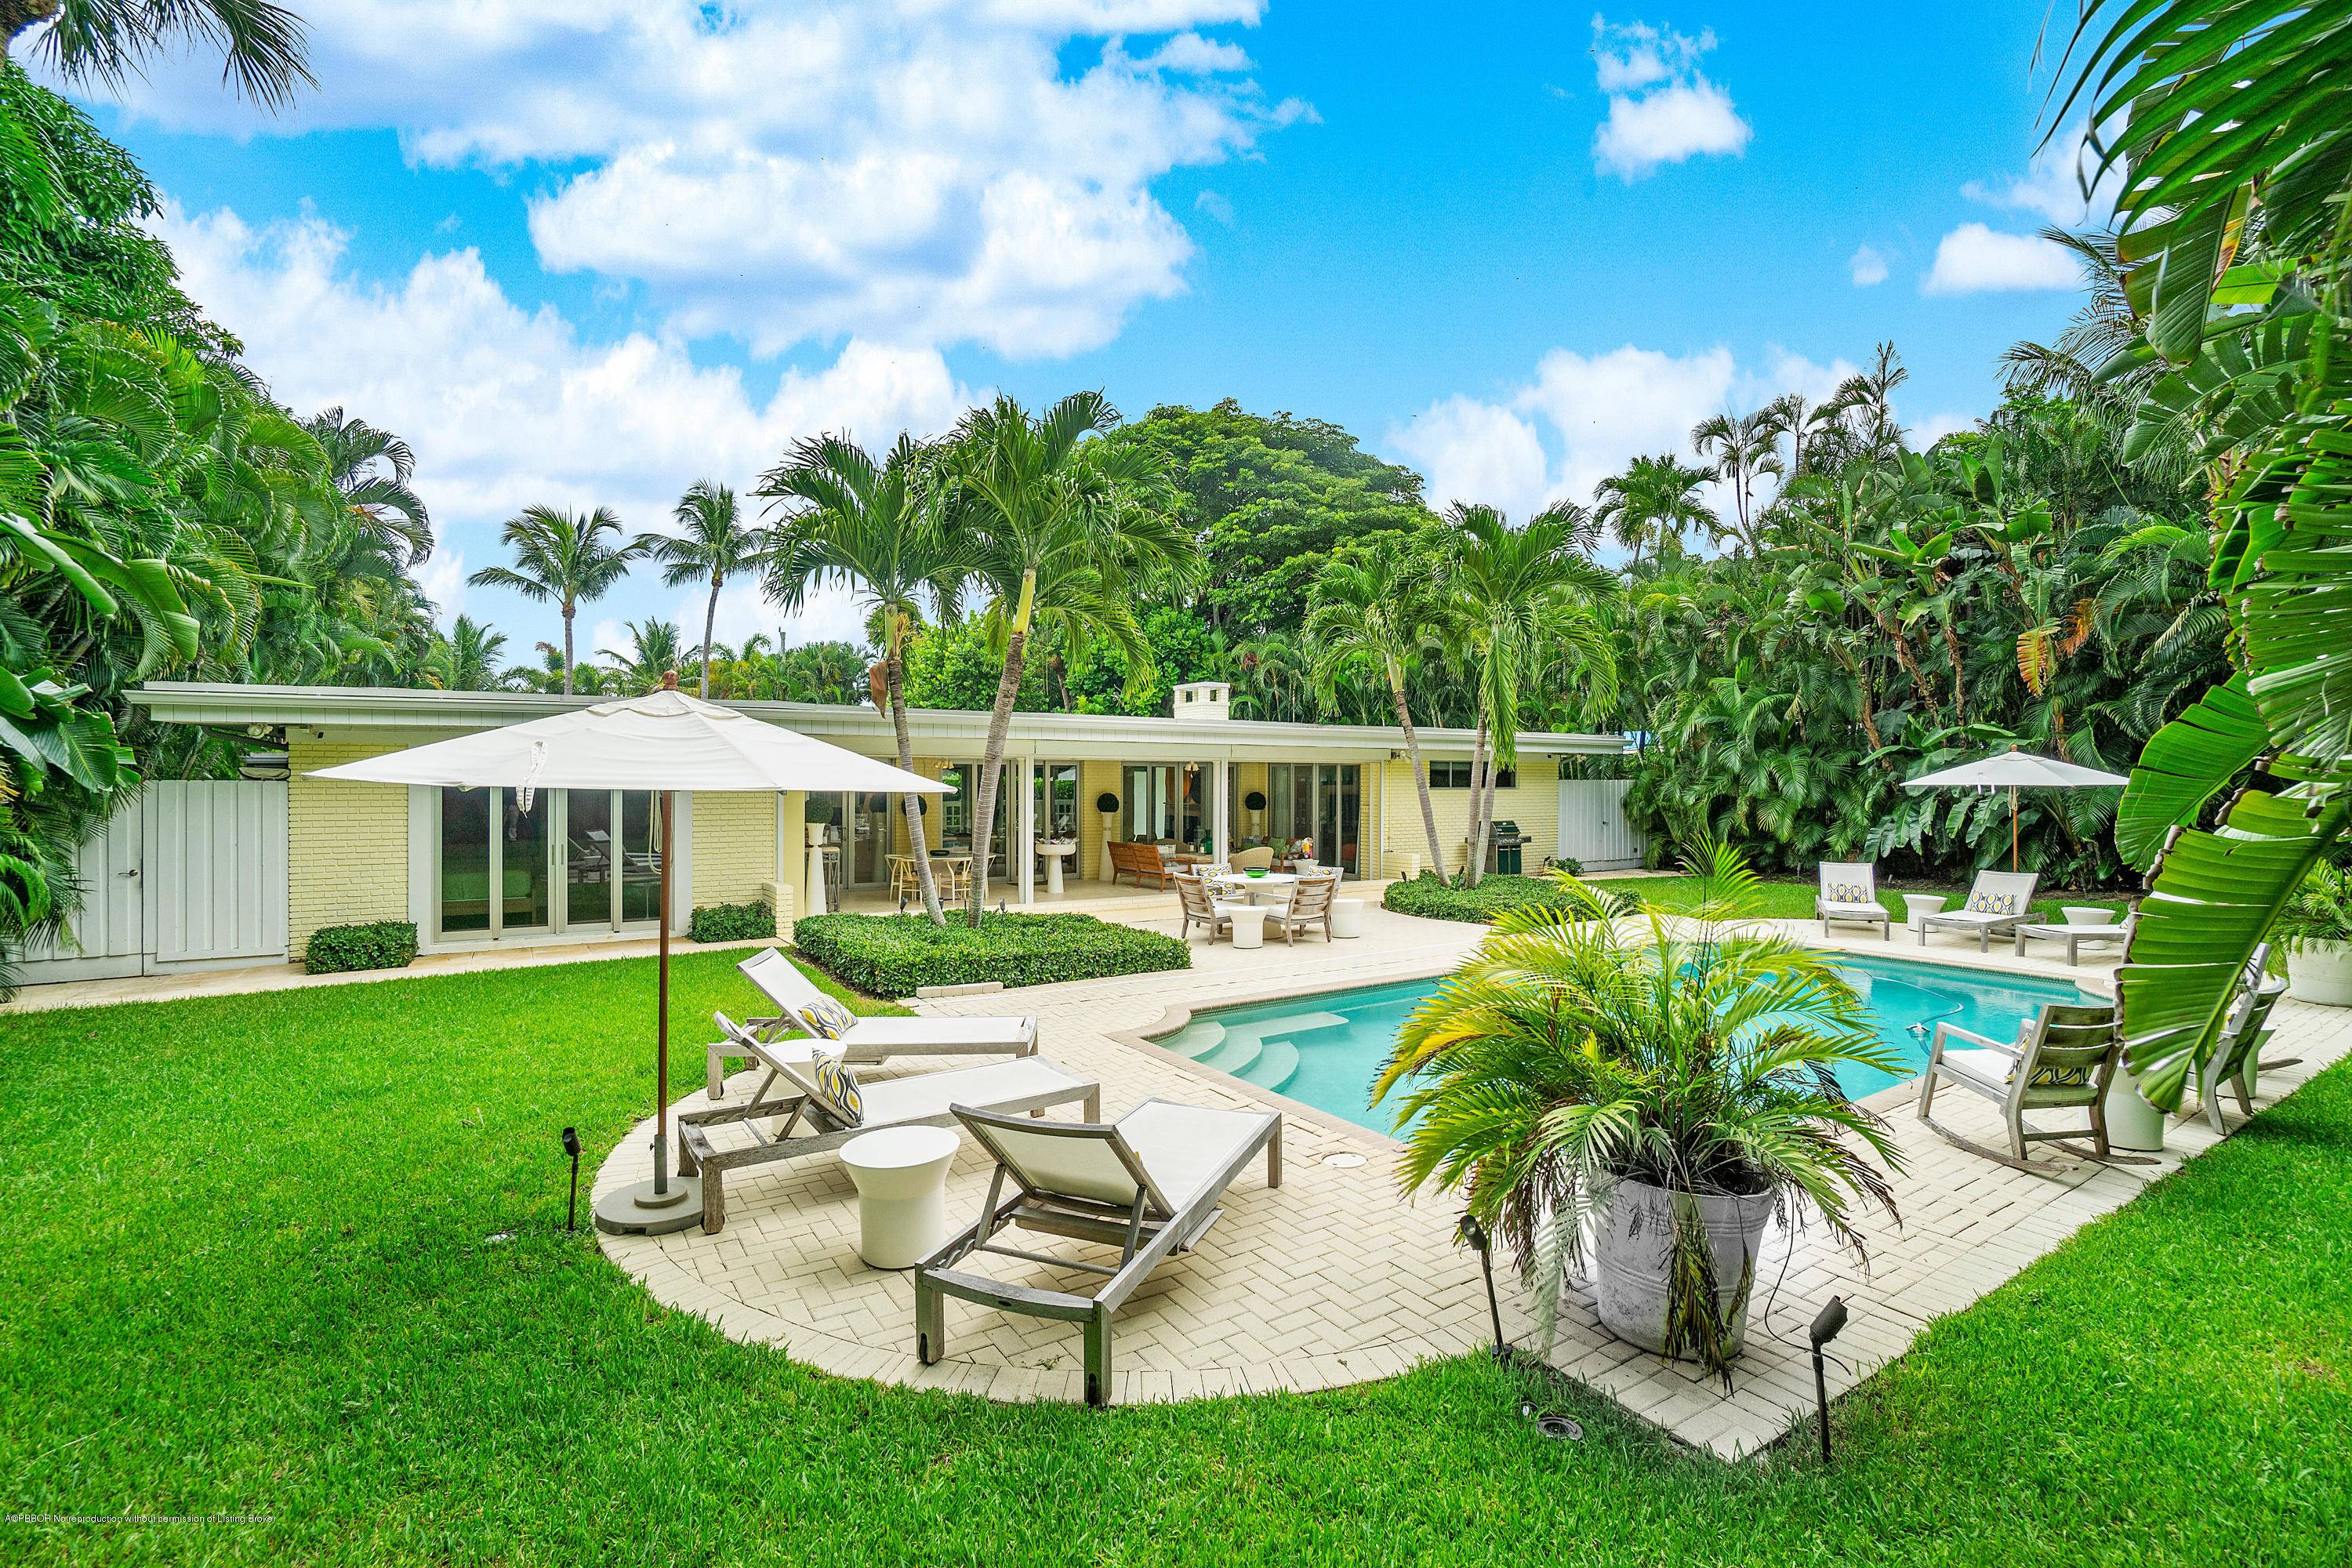 This Mid Century Modern Gem on tropical Hypoluxo Island occupies a double lot surrounded by lush landscaping.